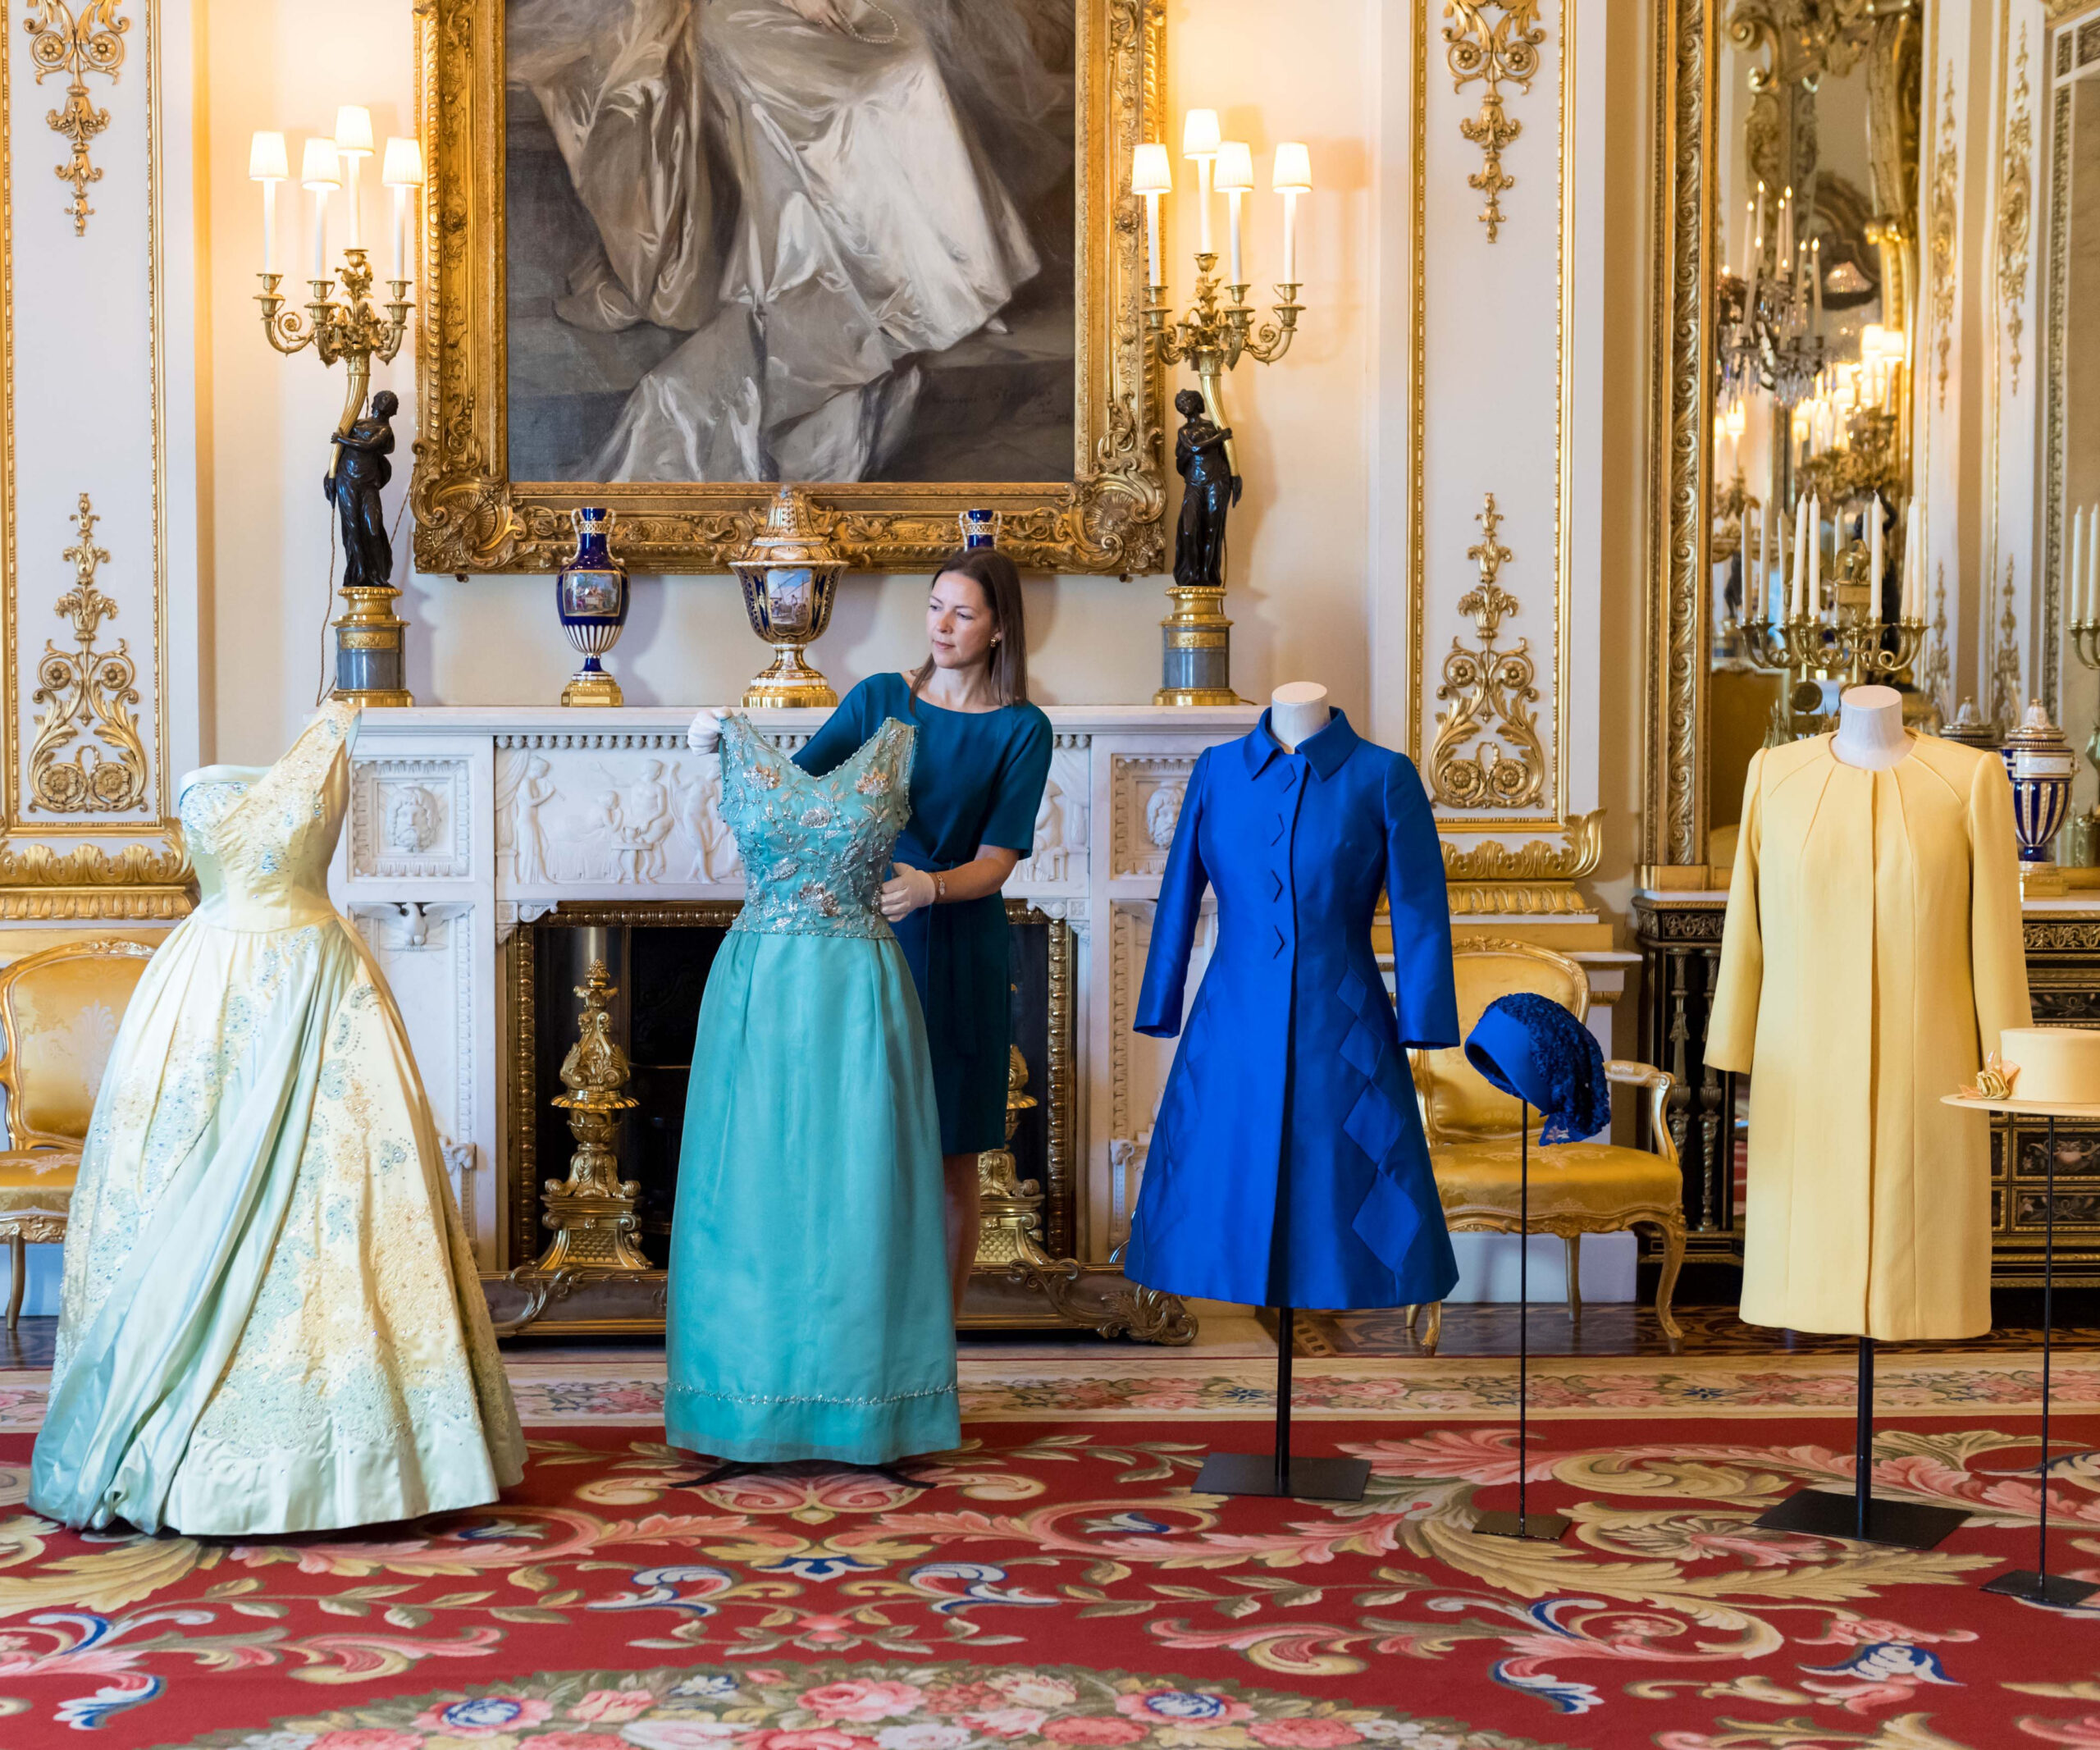 Queen’s iconic outfits go on display